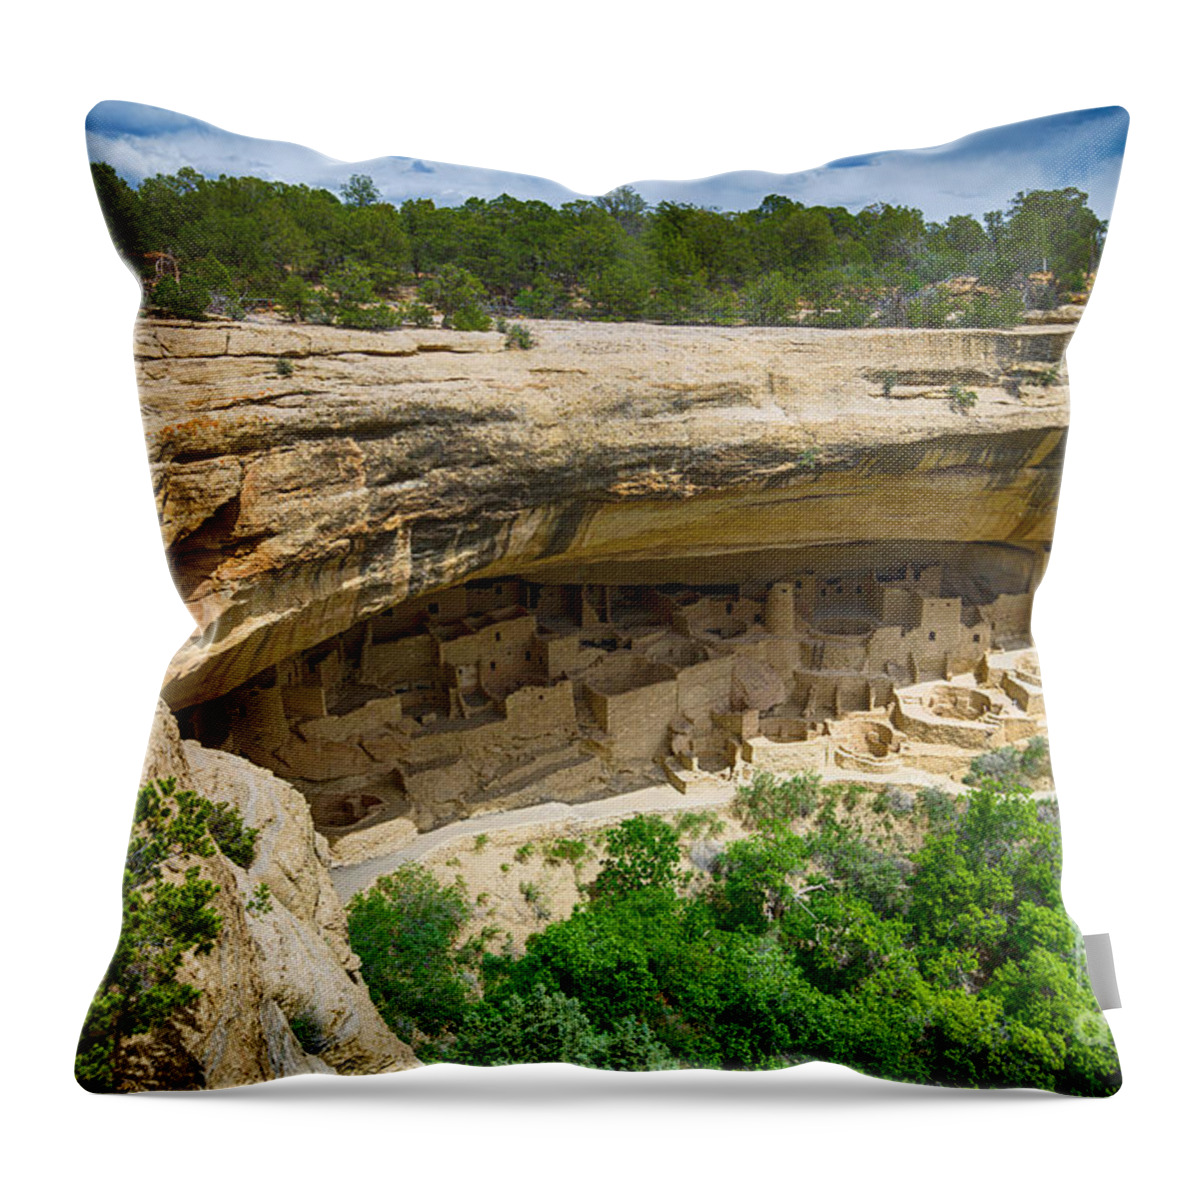 Usa Highlights Throw Pillow featuring the photograph Cliff Palace by Juergen Klust